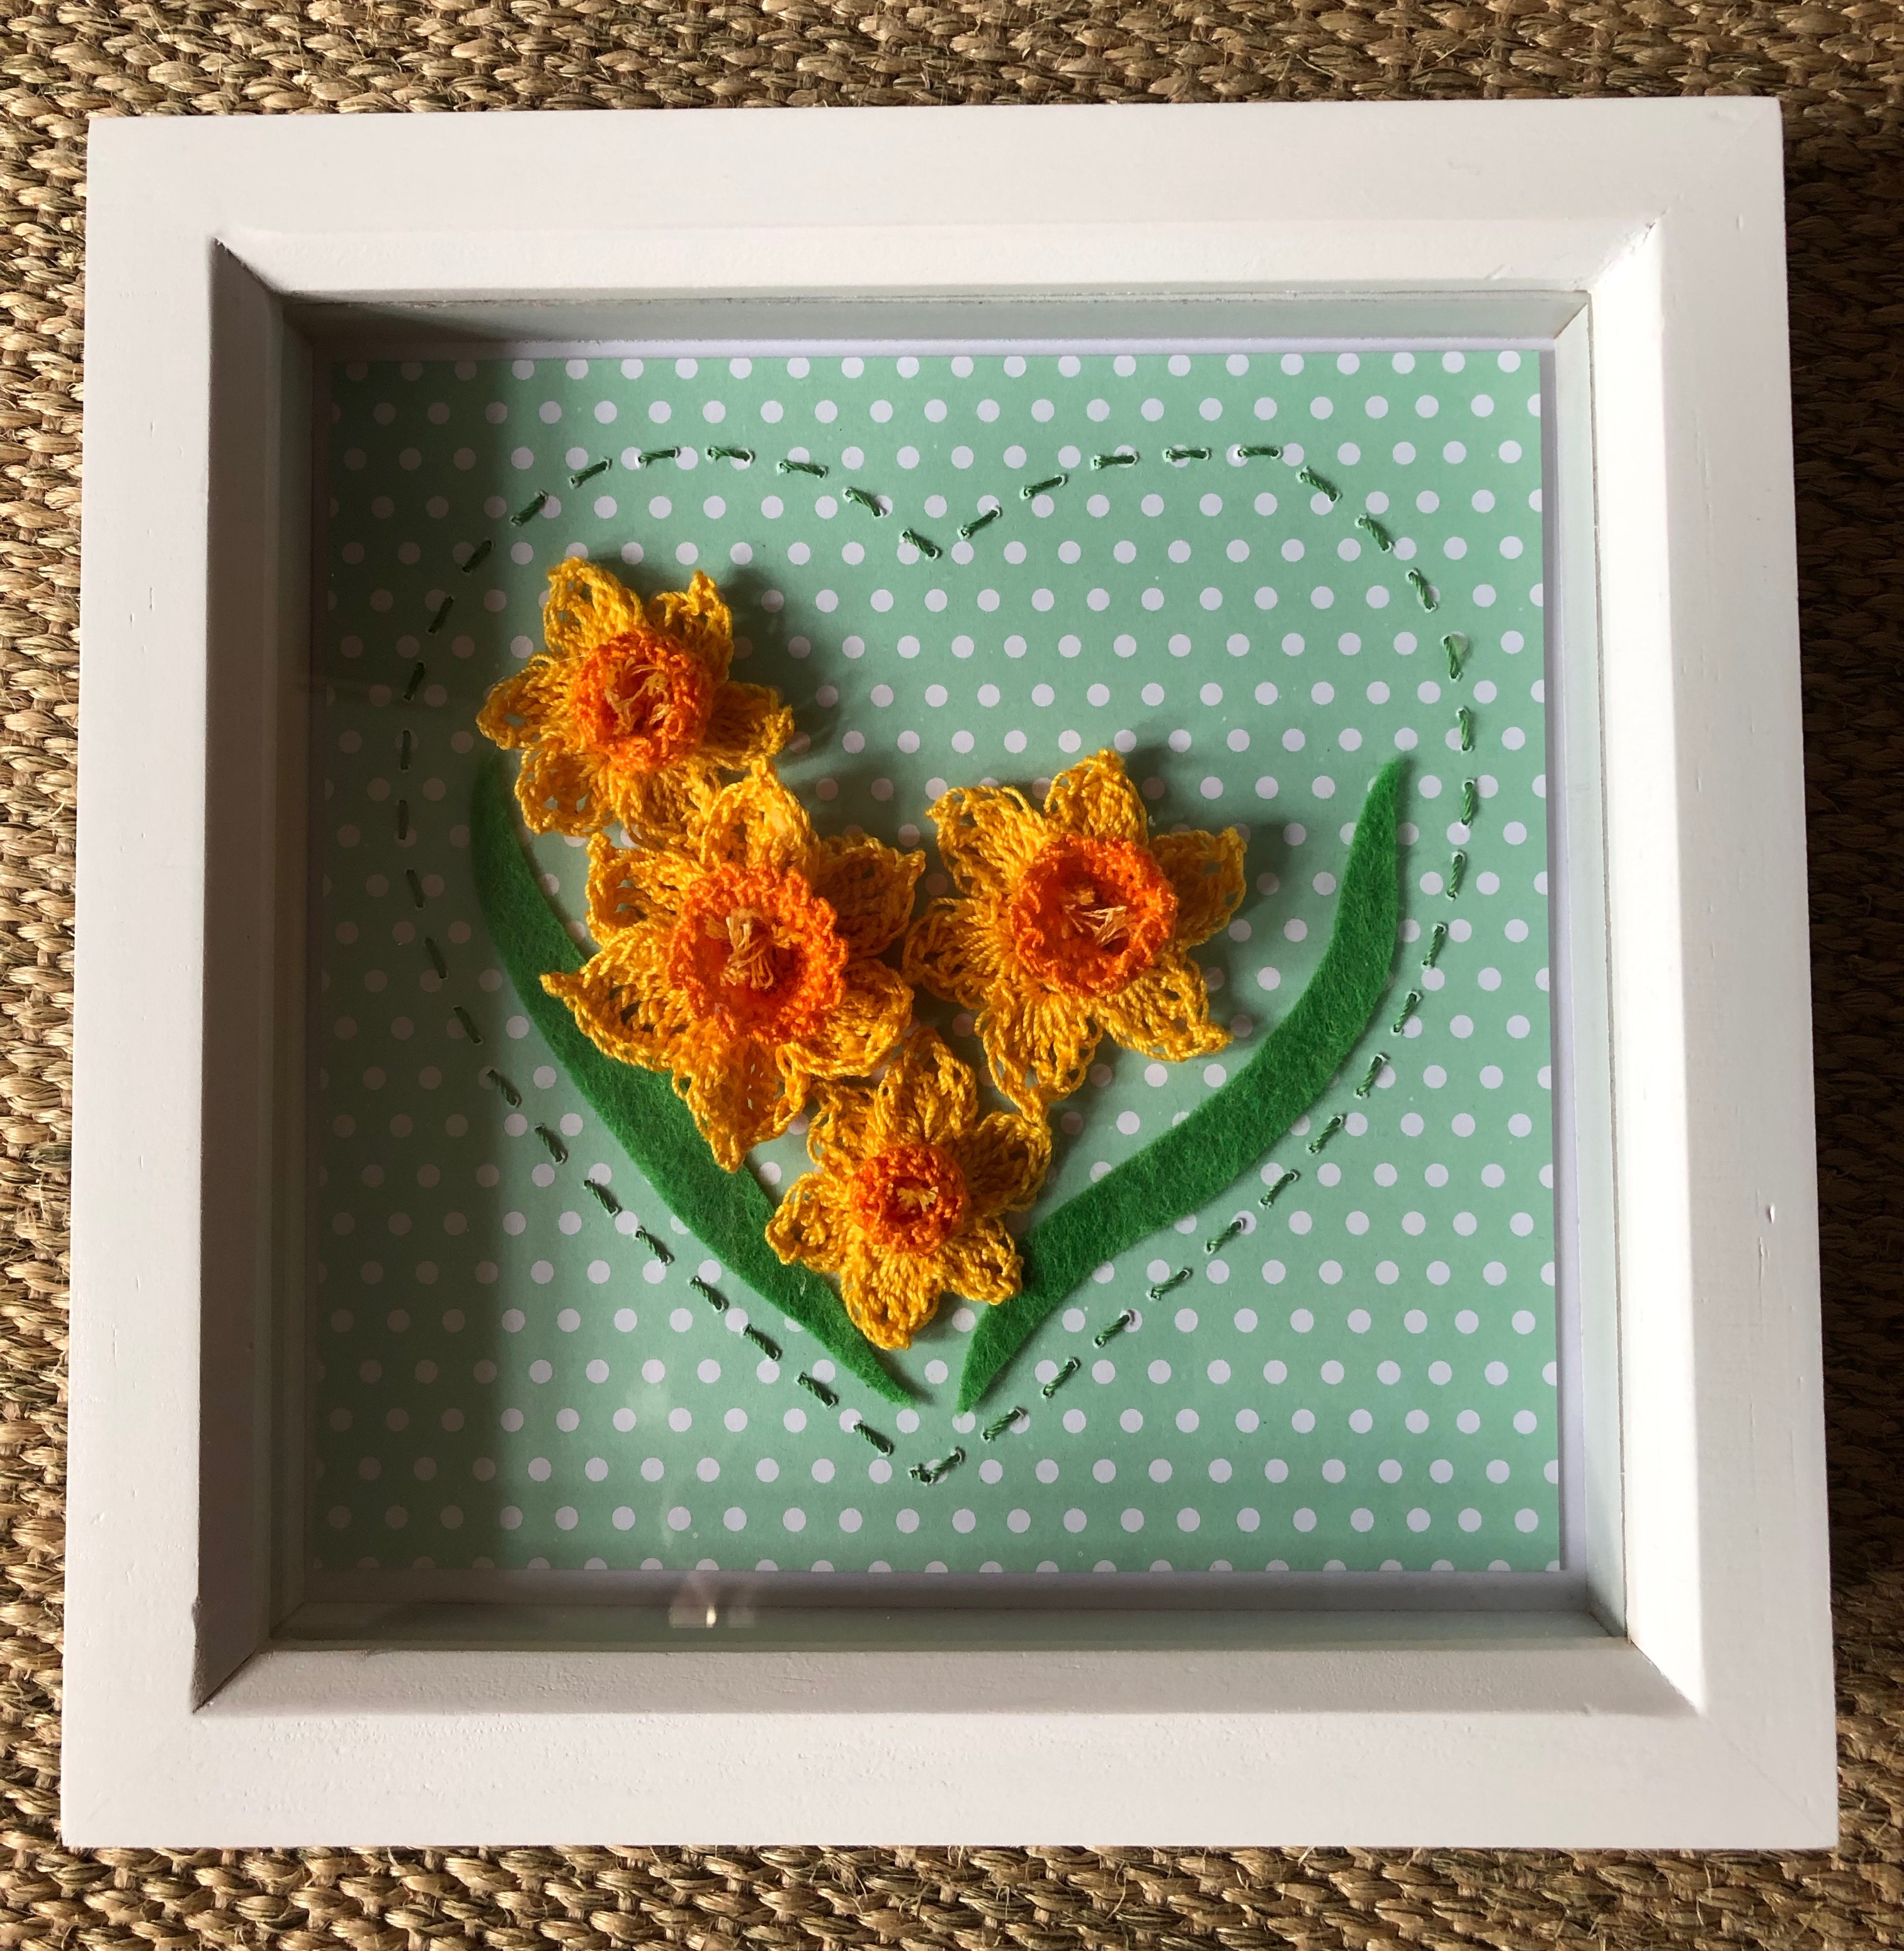 A white wooden framed picture with 4 handmade, crocheted yellow and orange daffodils with green felt leaves surrounded by a hand stitched green heart on a green and white spotty background.